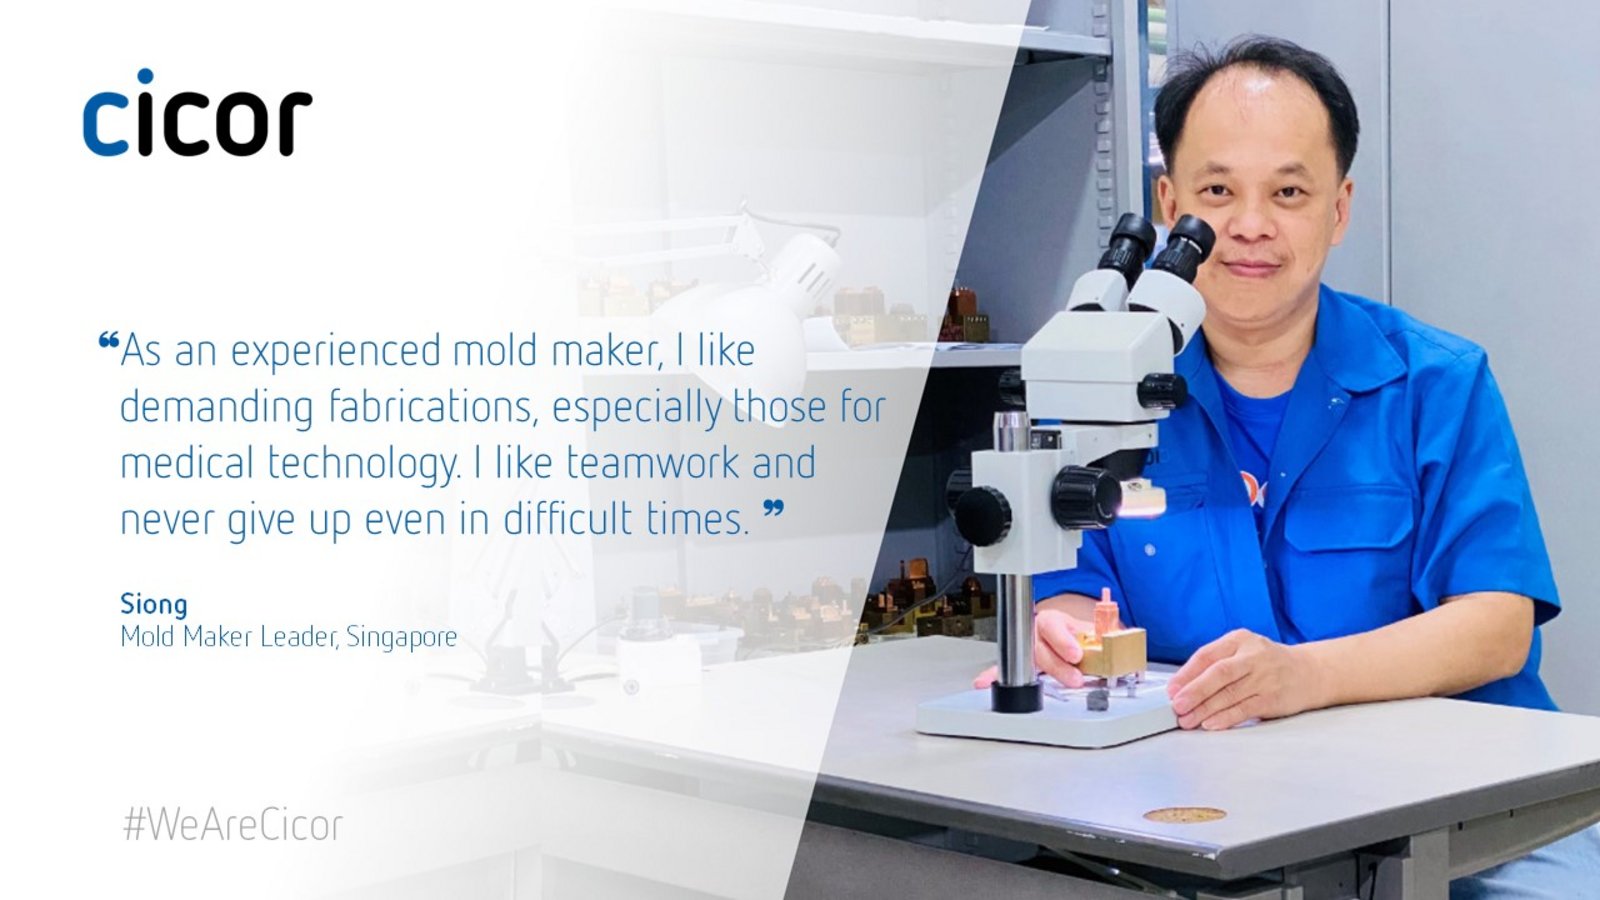 Testimonial of Siong who works at the Cicor site in Singapore